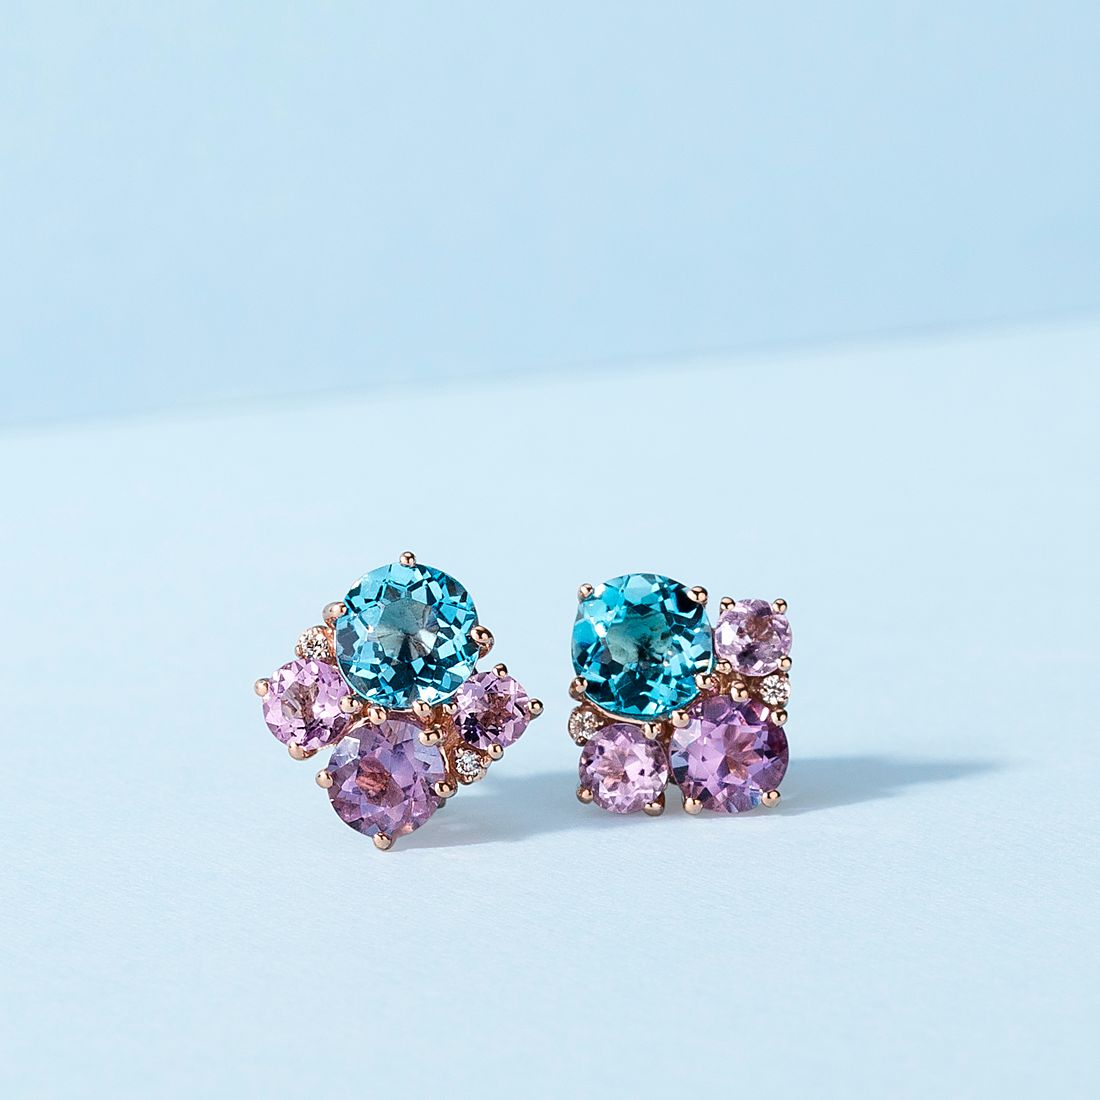 14k rose gold stud earrings with blue topaz, diamonds and amethyst.